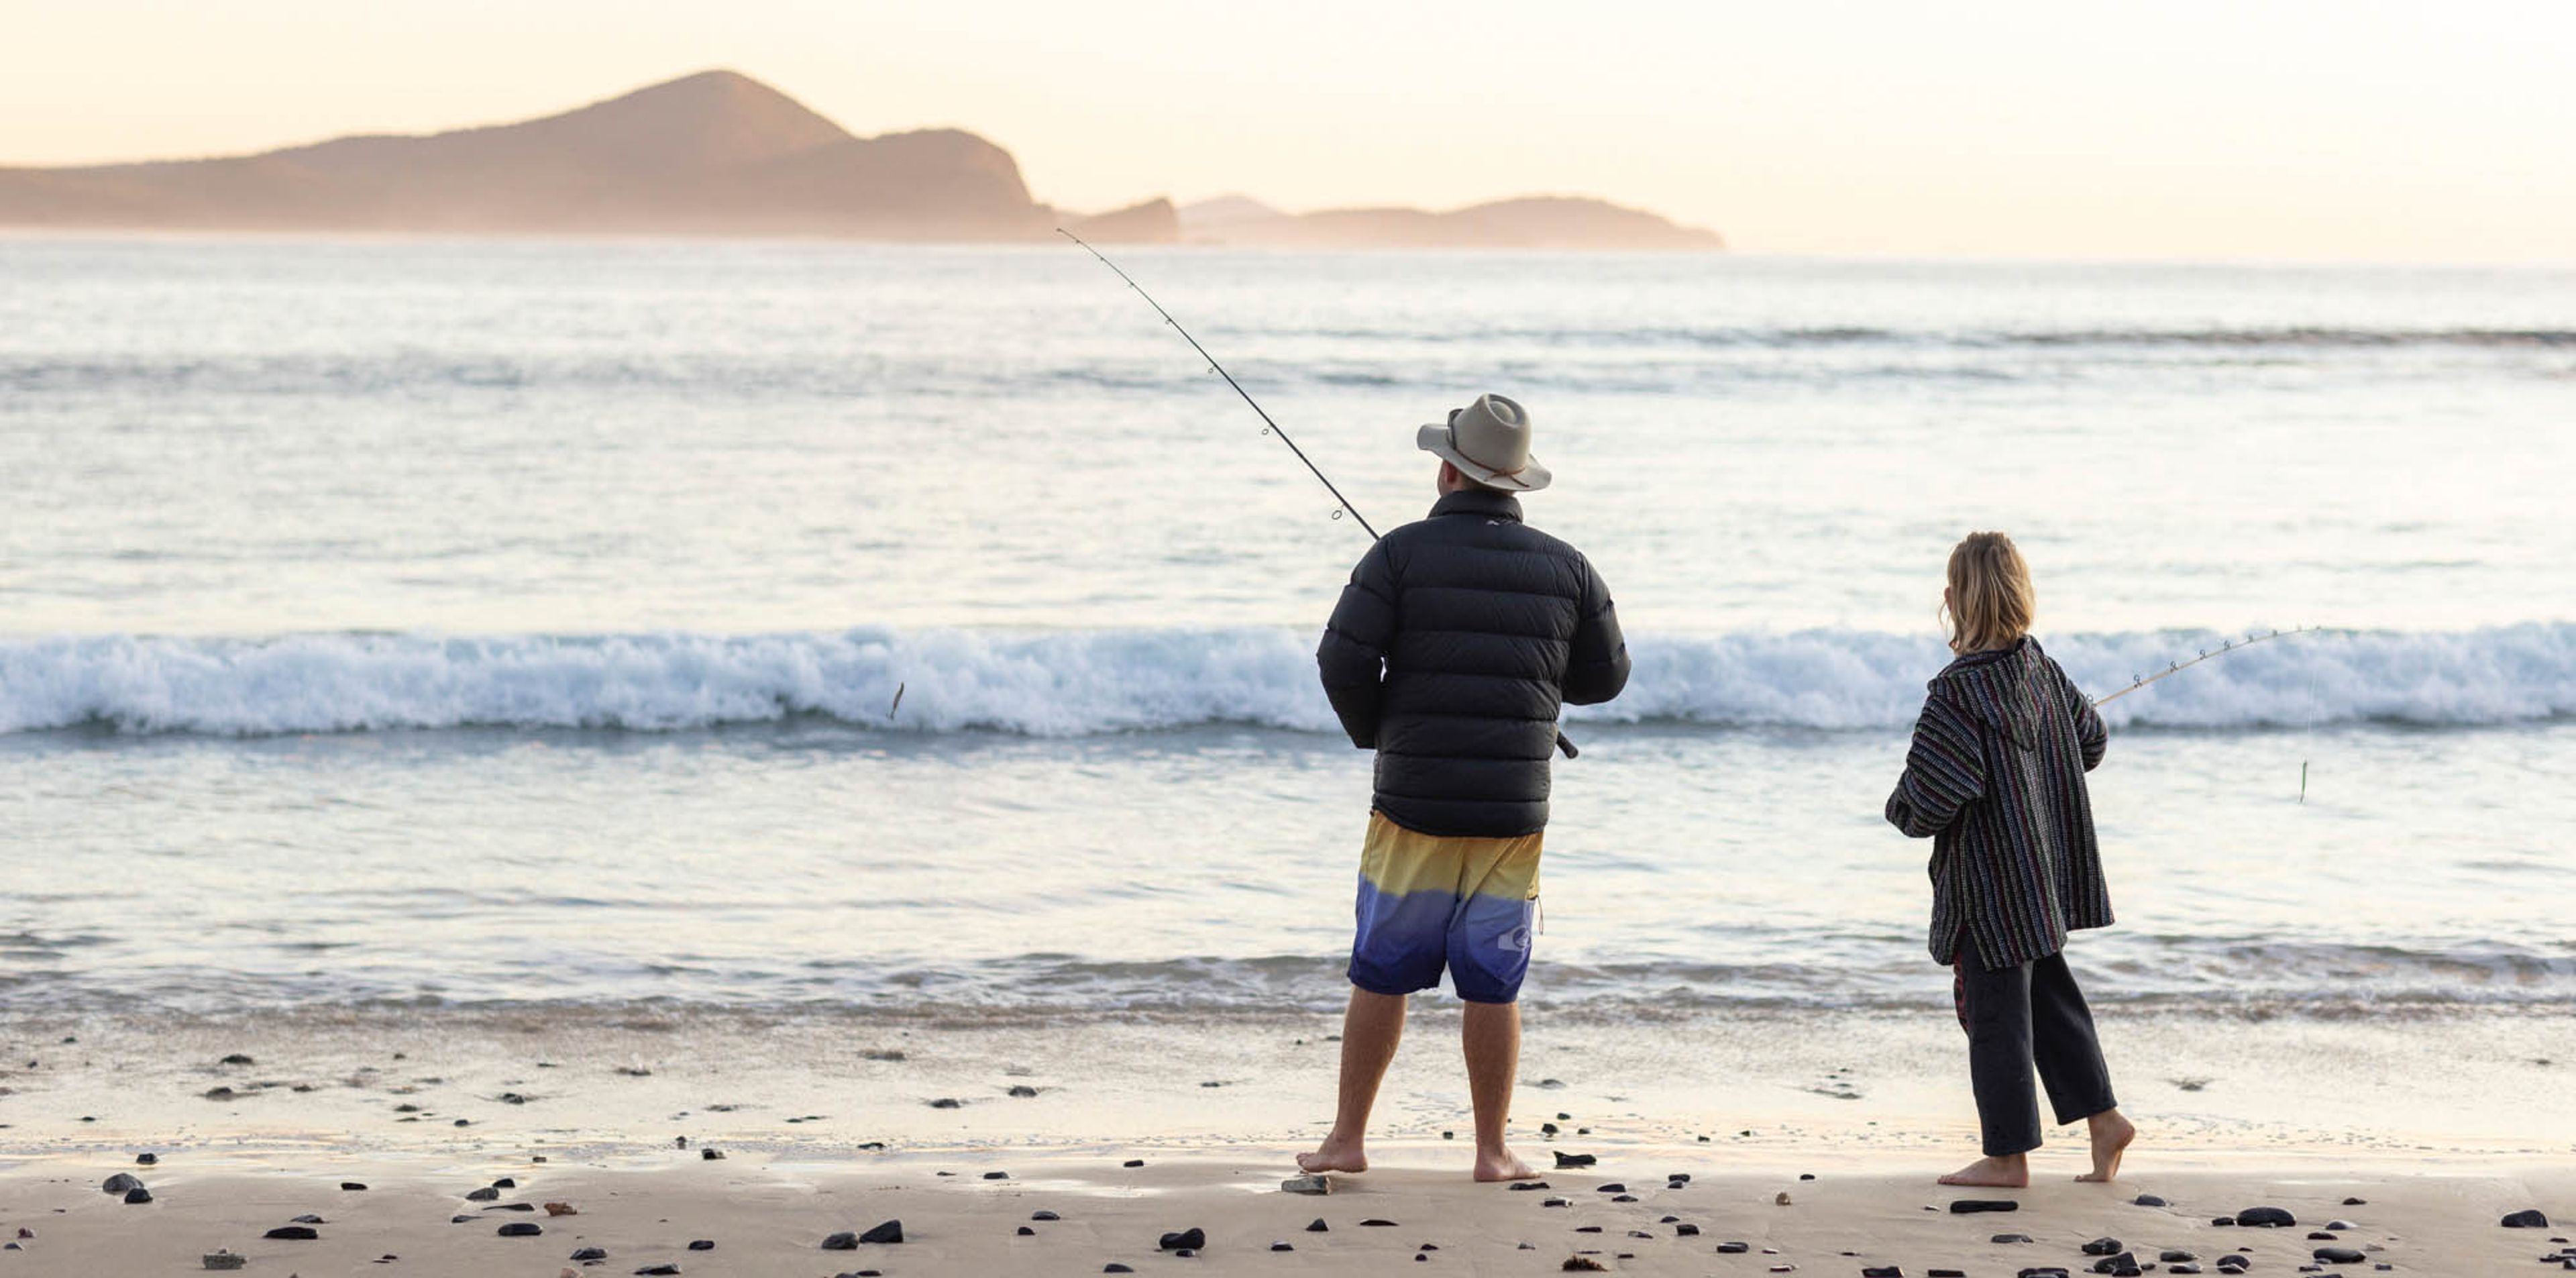 People fishing on a beach in NSW